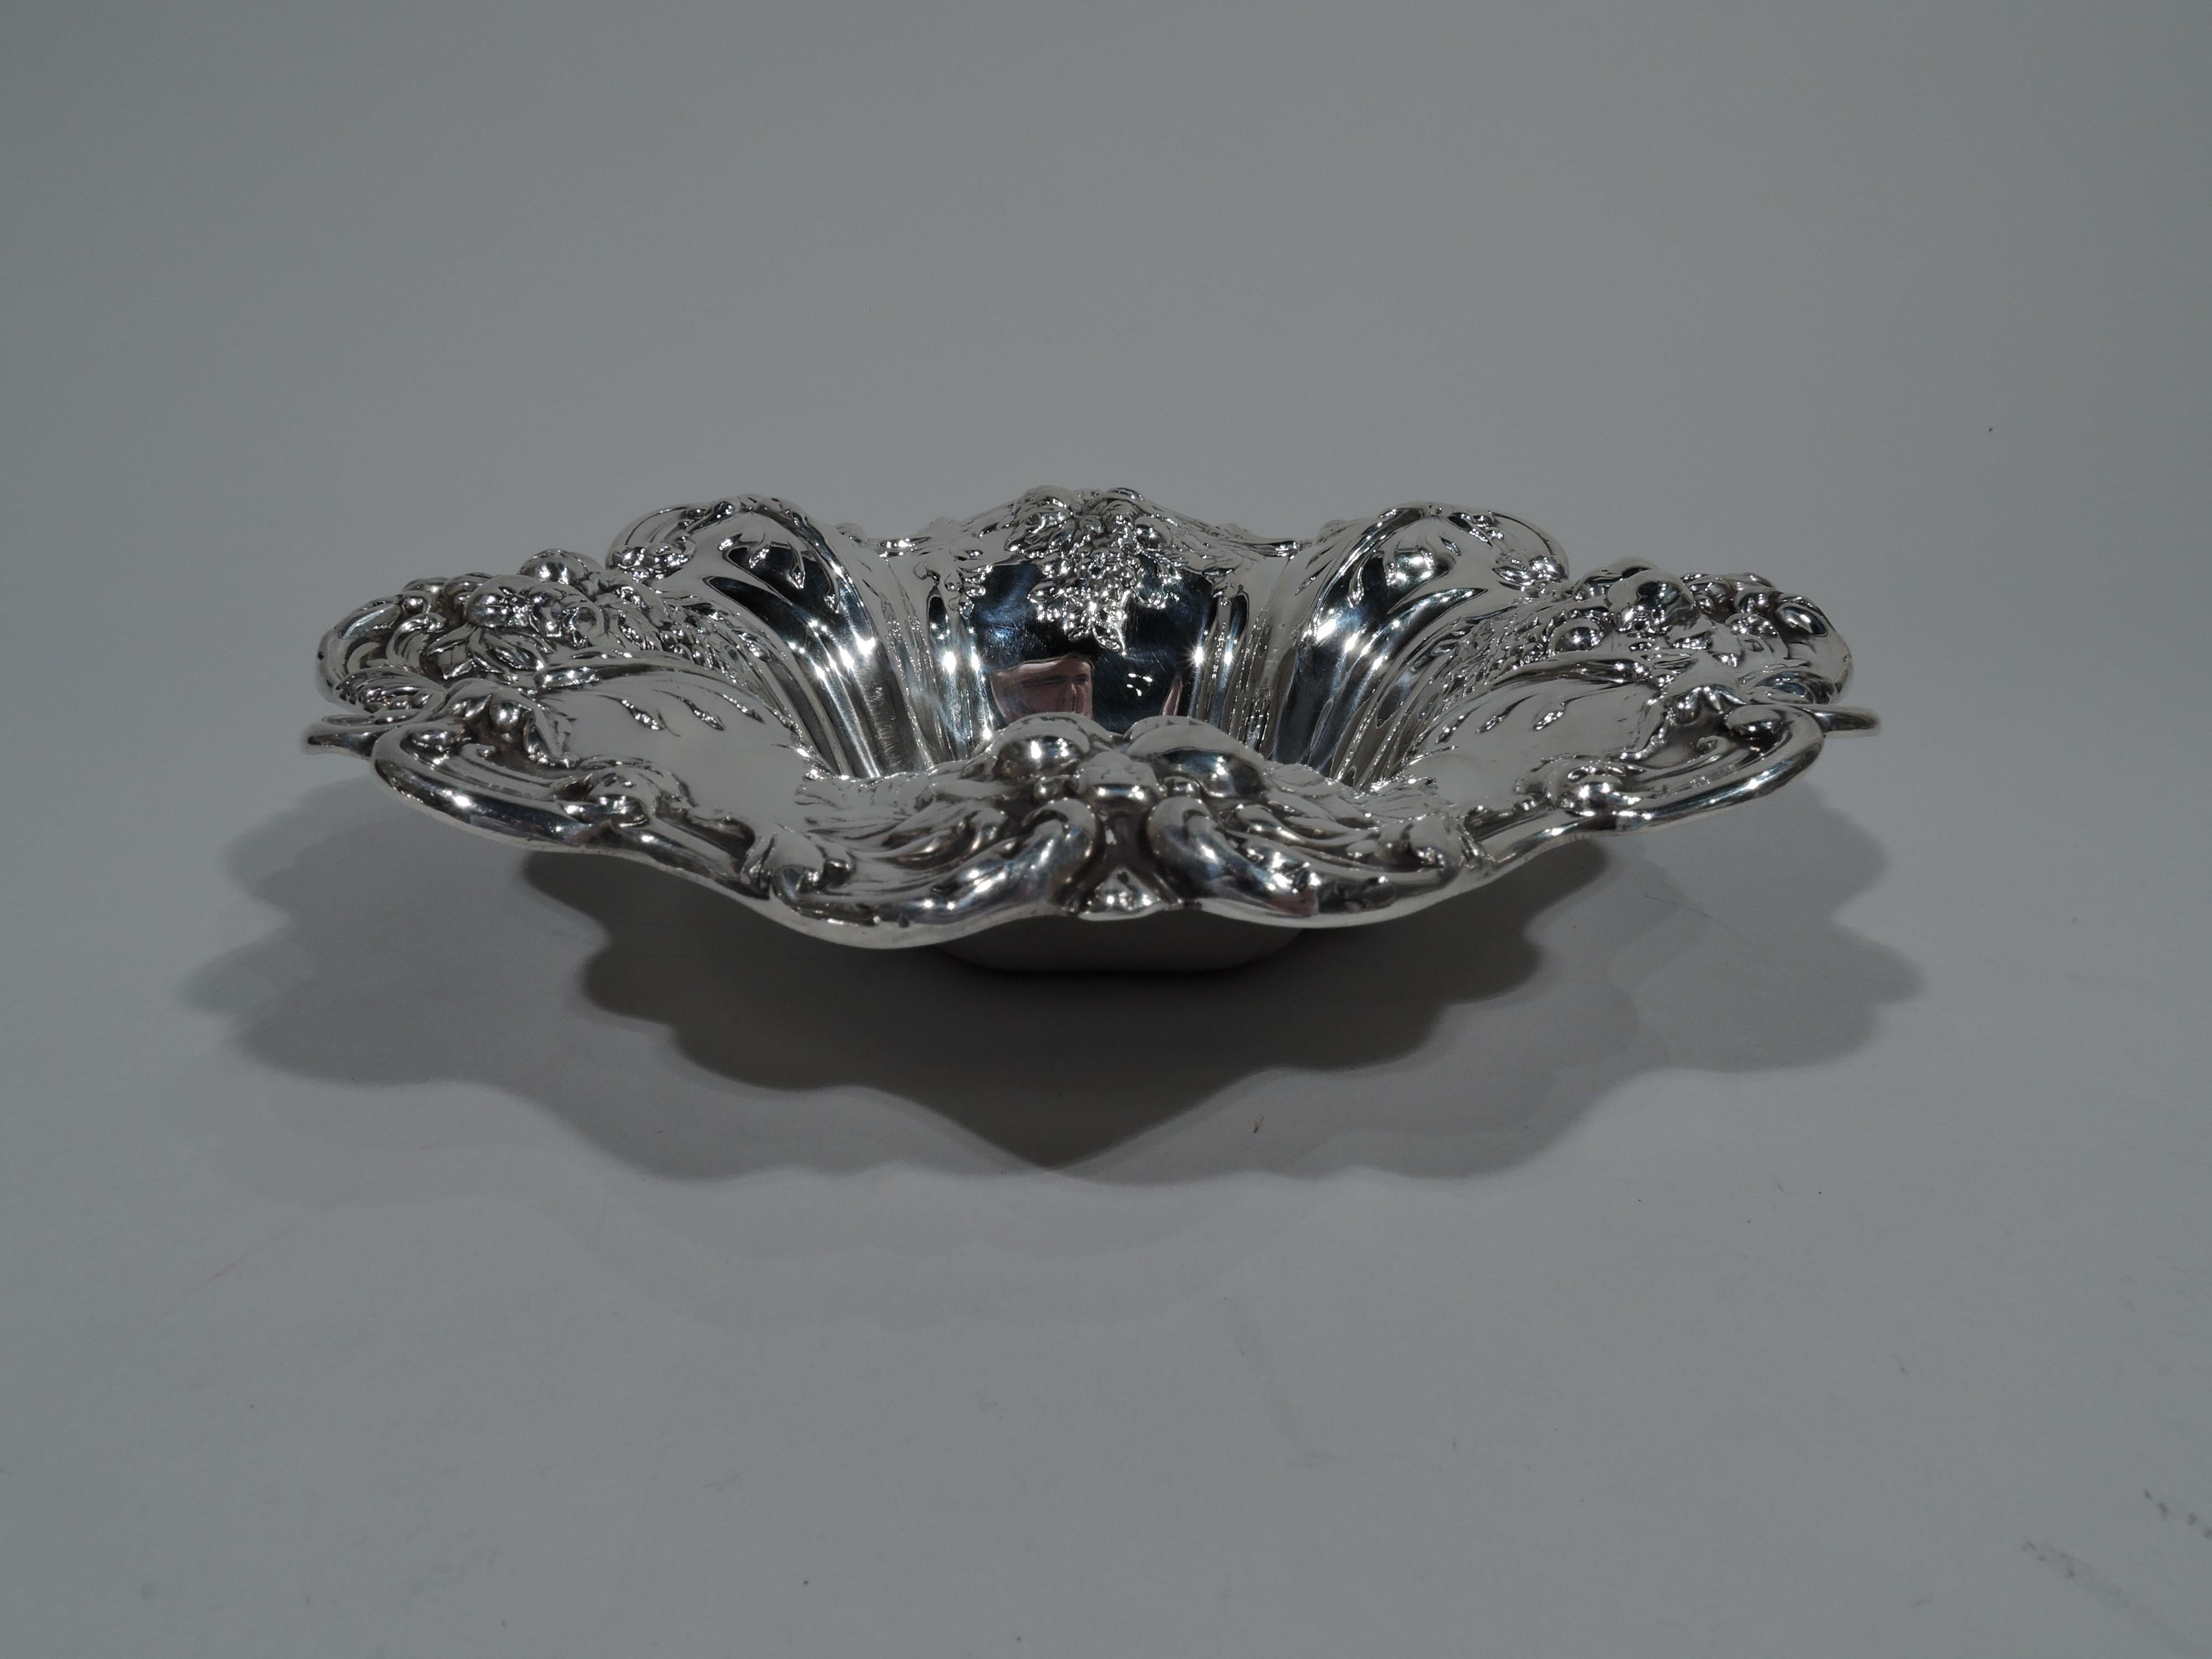 French Renaissance Revival sterling silver bowl in Francis I pattern. Made by Reed & Barton in Taunton, Mass. Quatrefoil well and wide flared mouth with wavy scrolled rim. Chased and embossed fruits. Hallmark includes pattern name and no. X569.